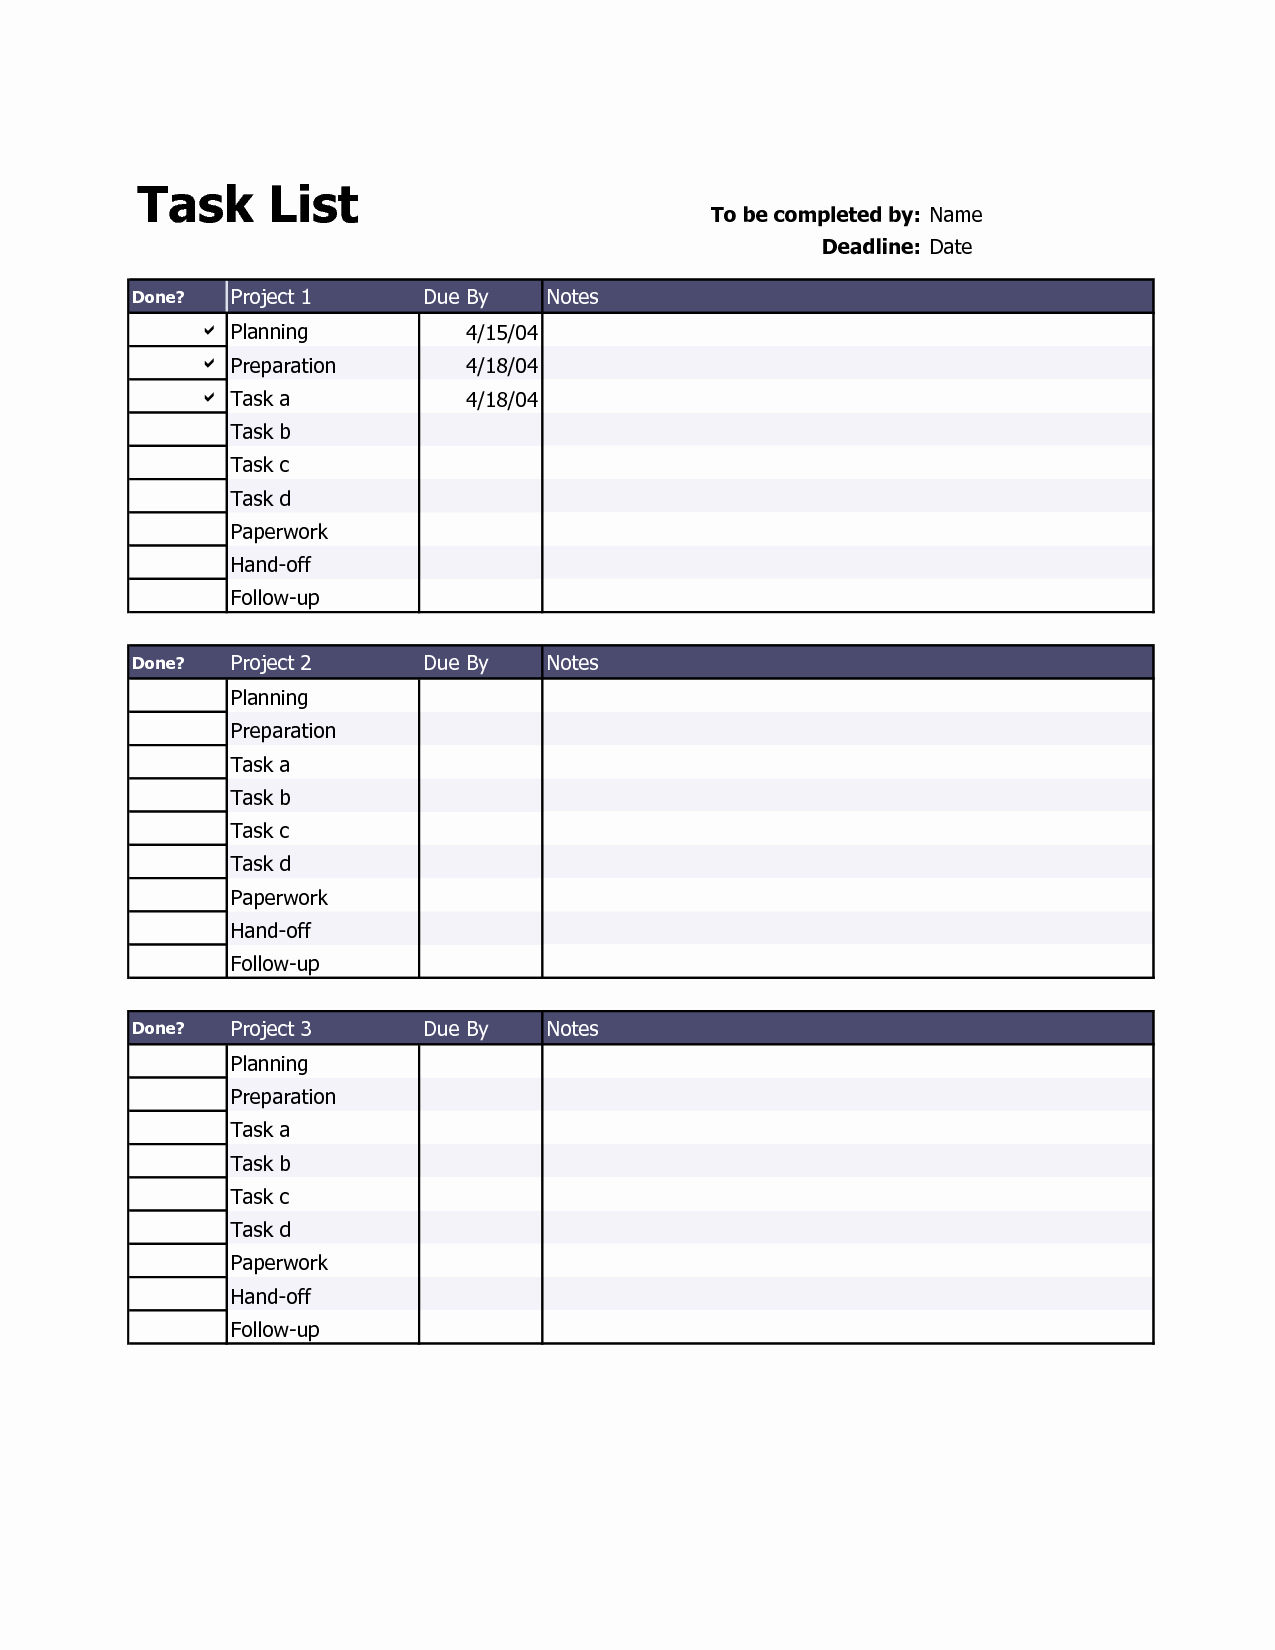 Project Task List Example Inspirational 10 Effective Task List Templates for Project or events Violeet